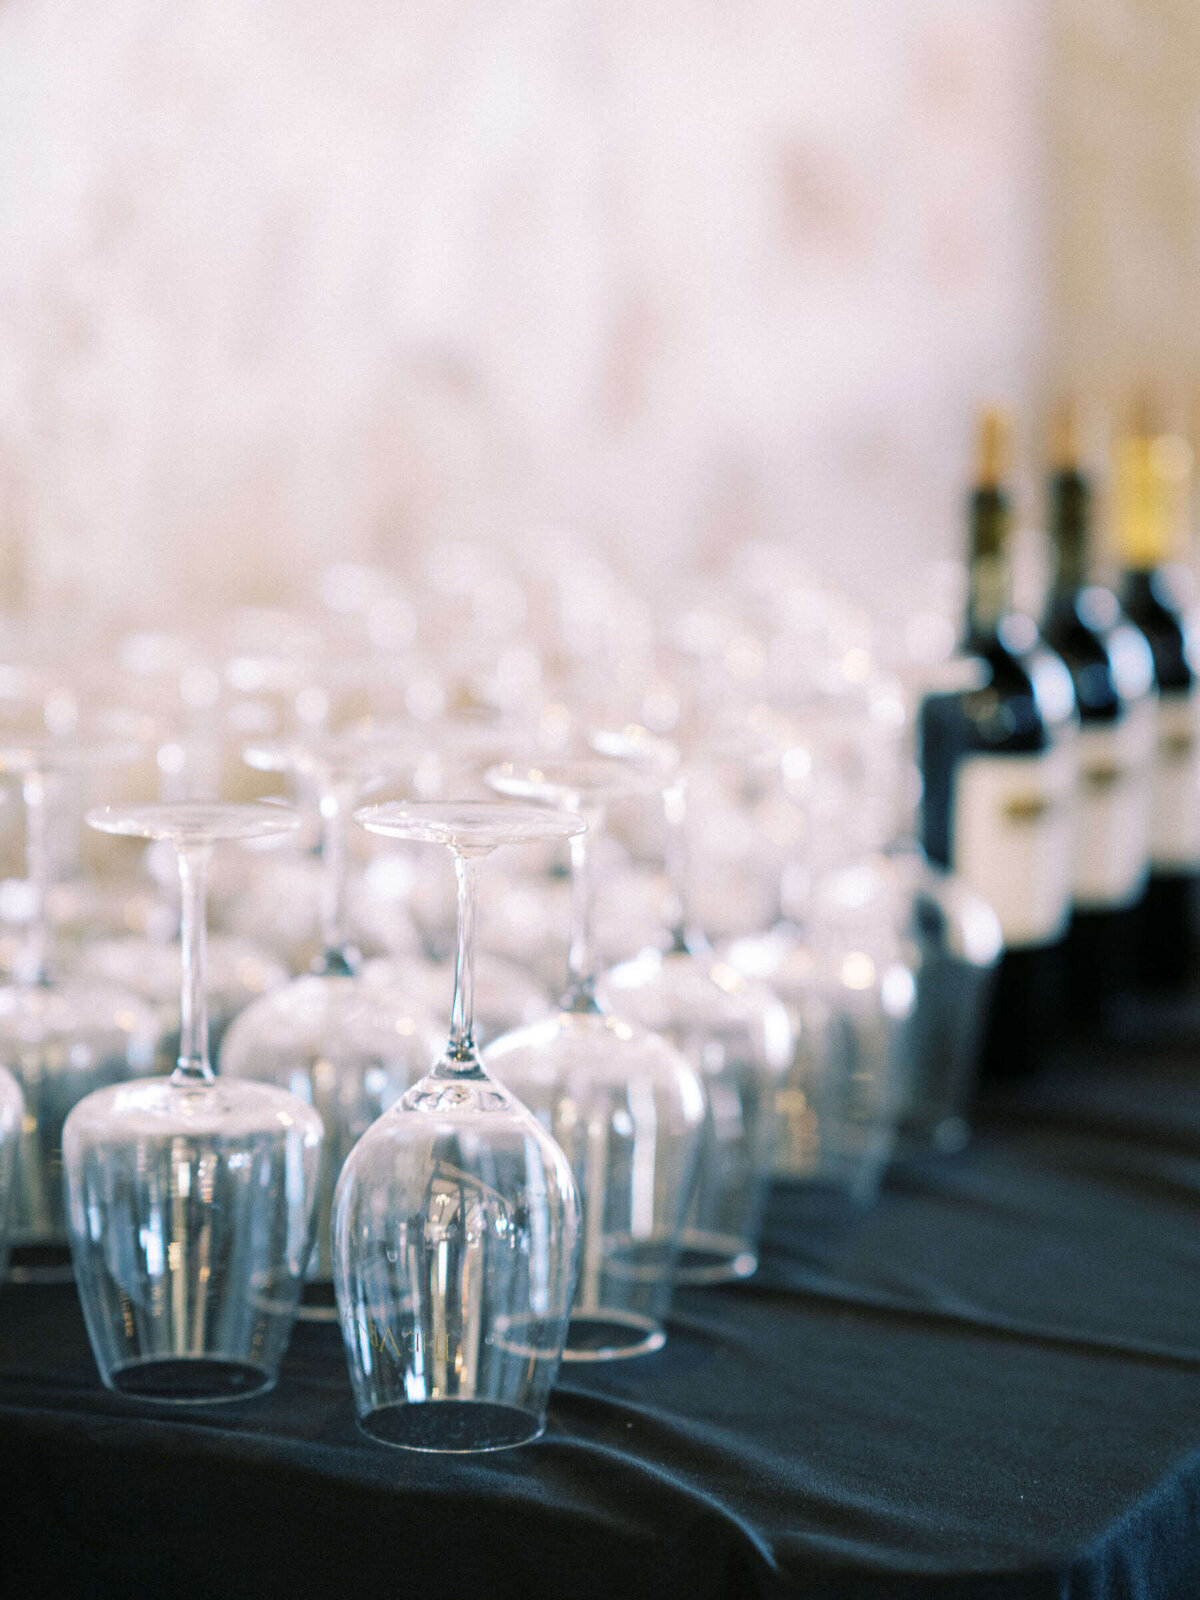 Wine glasses and bottles at Florence, Texas wedding